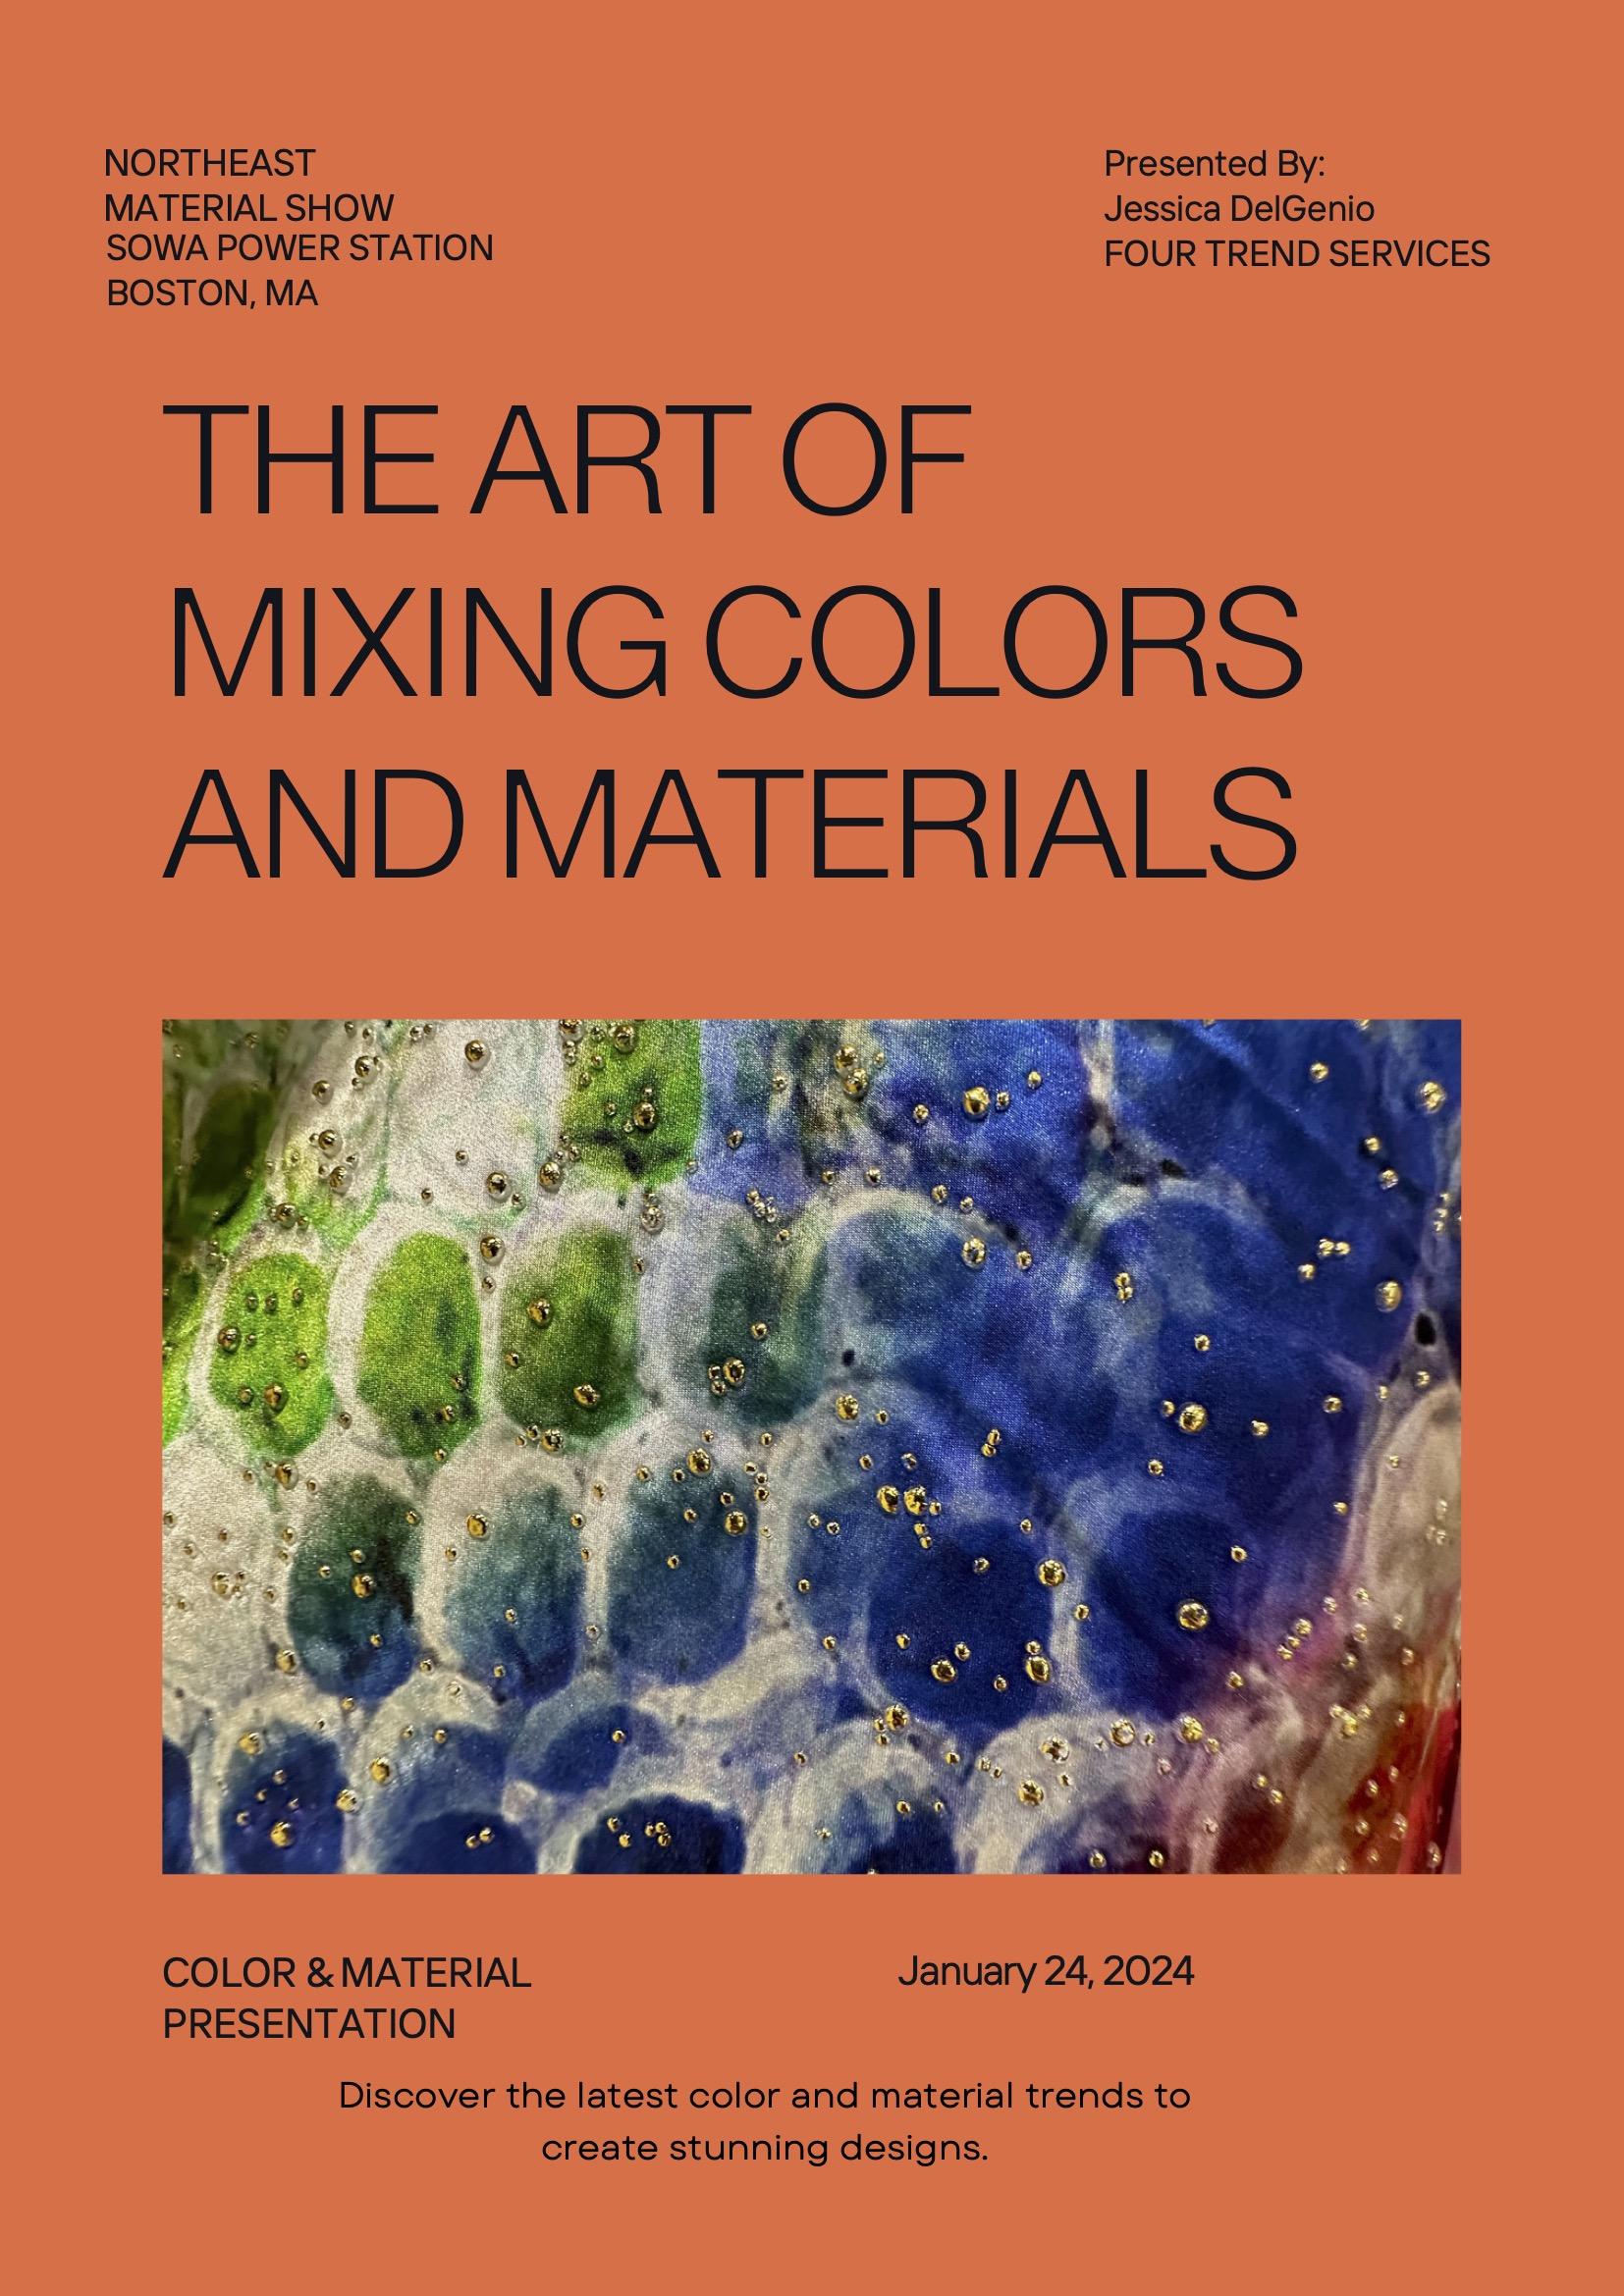 THE ART OF MIXING COLORS AND MATERIALS